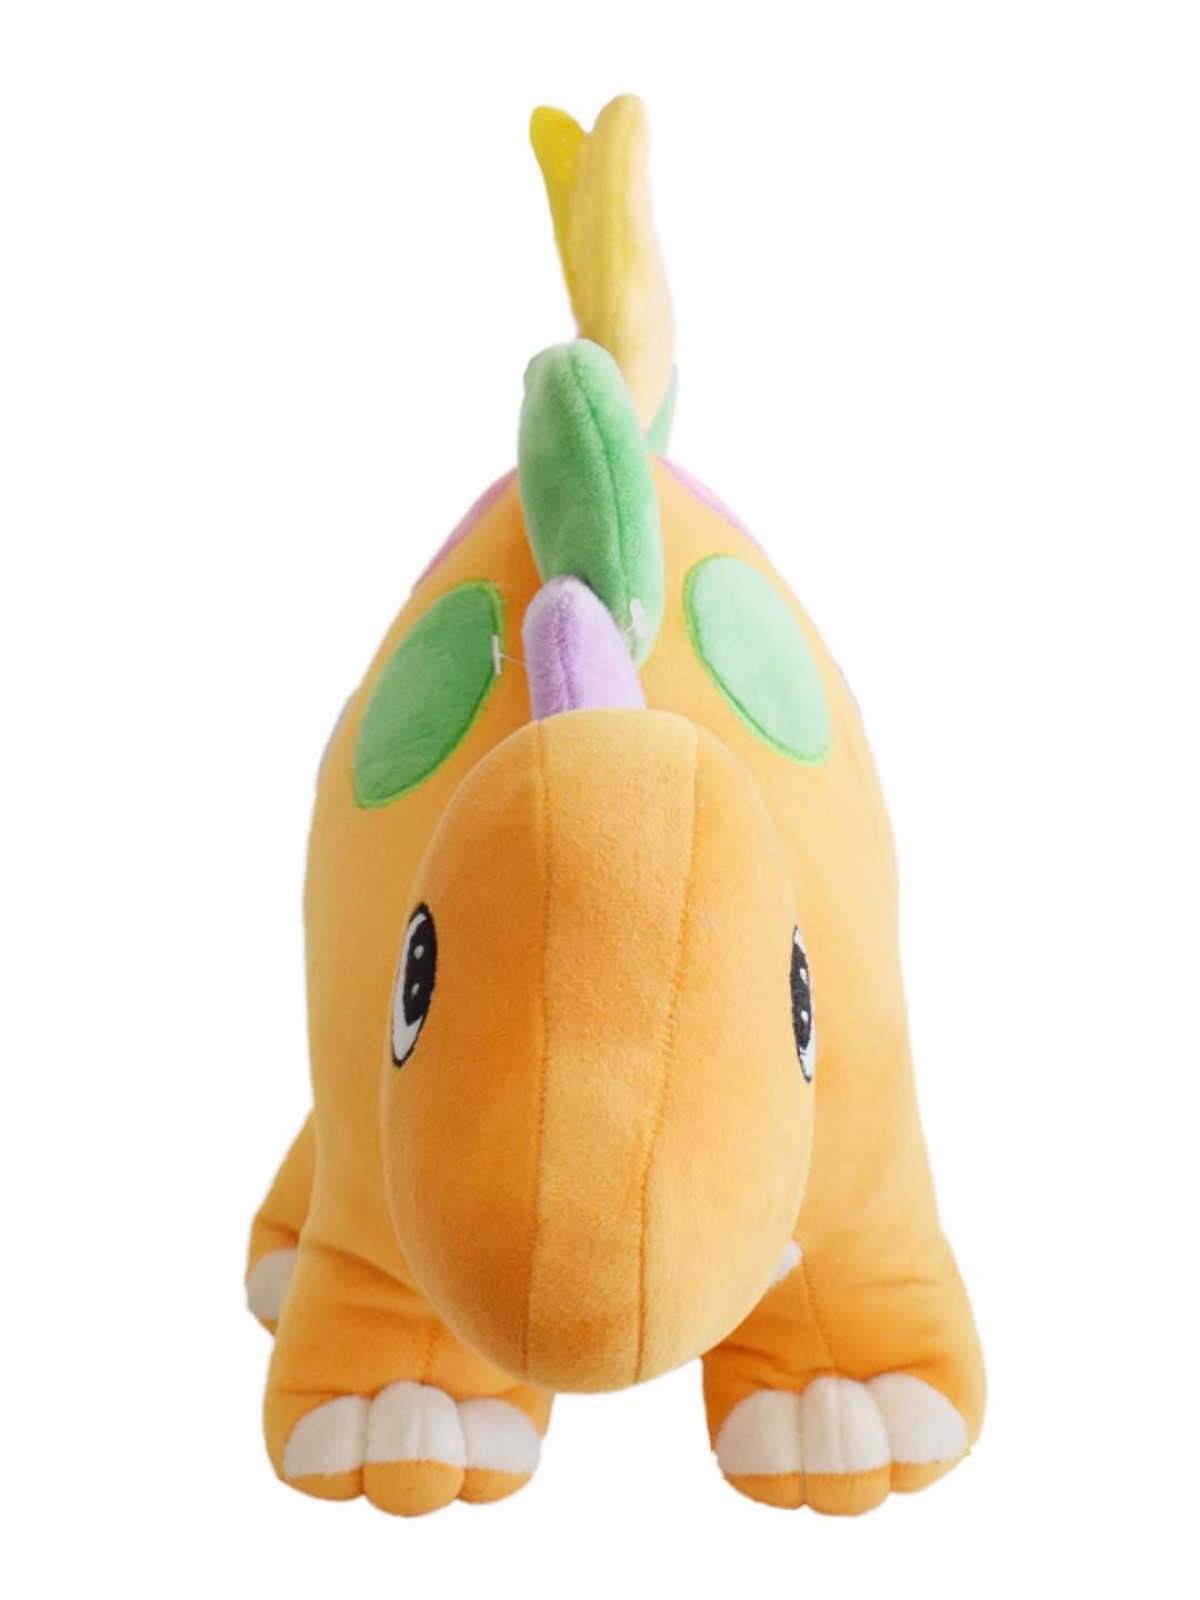 Adorable Stuffed Plush Dinosaur By Mirada, Soft Toys For Kids Of All Ages, 3Y+, Orange, 50Cm